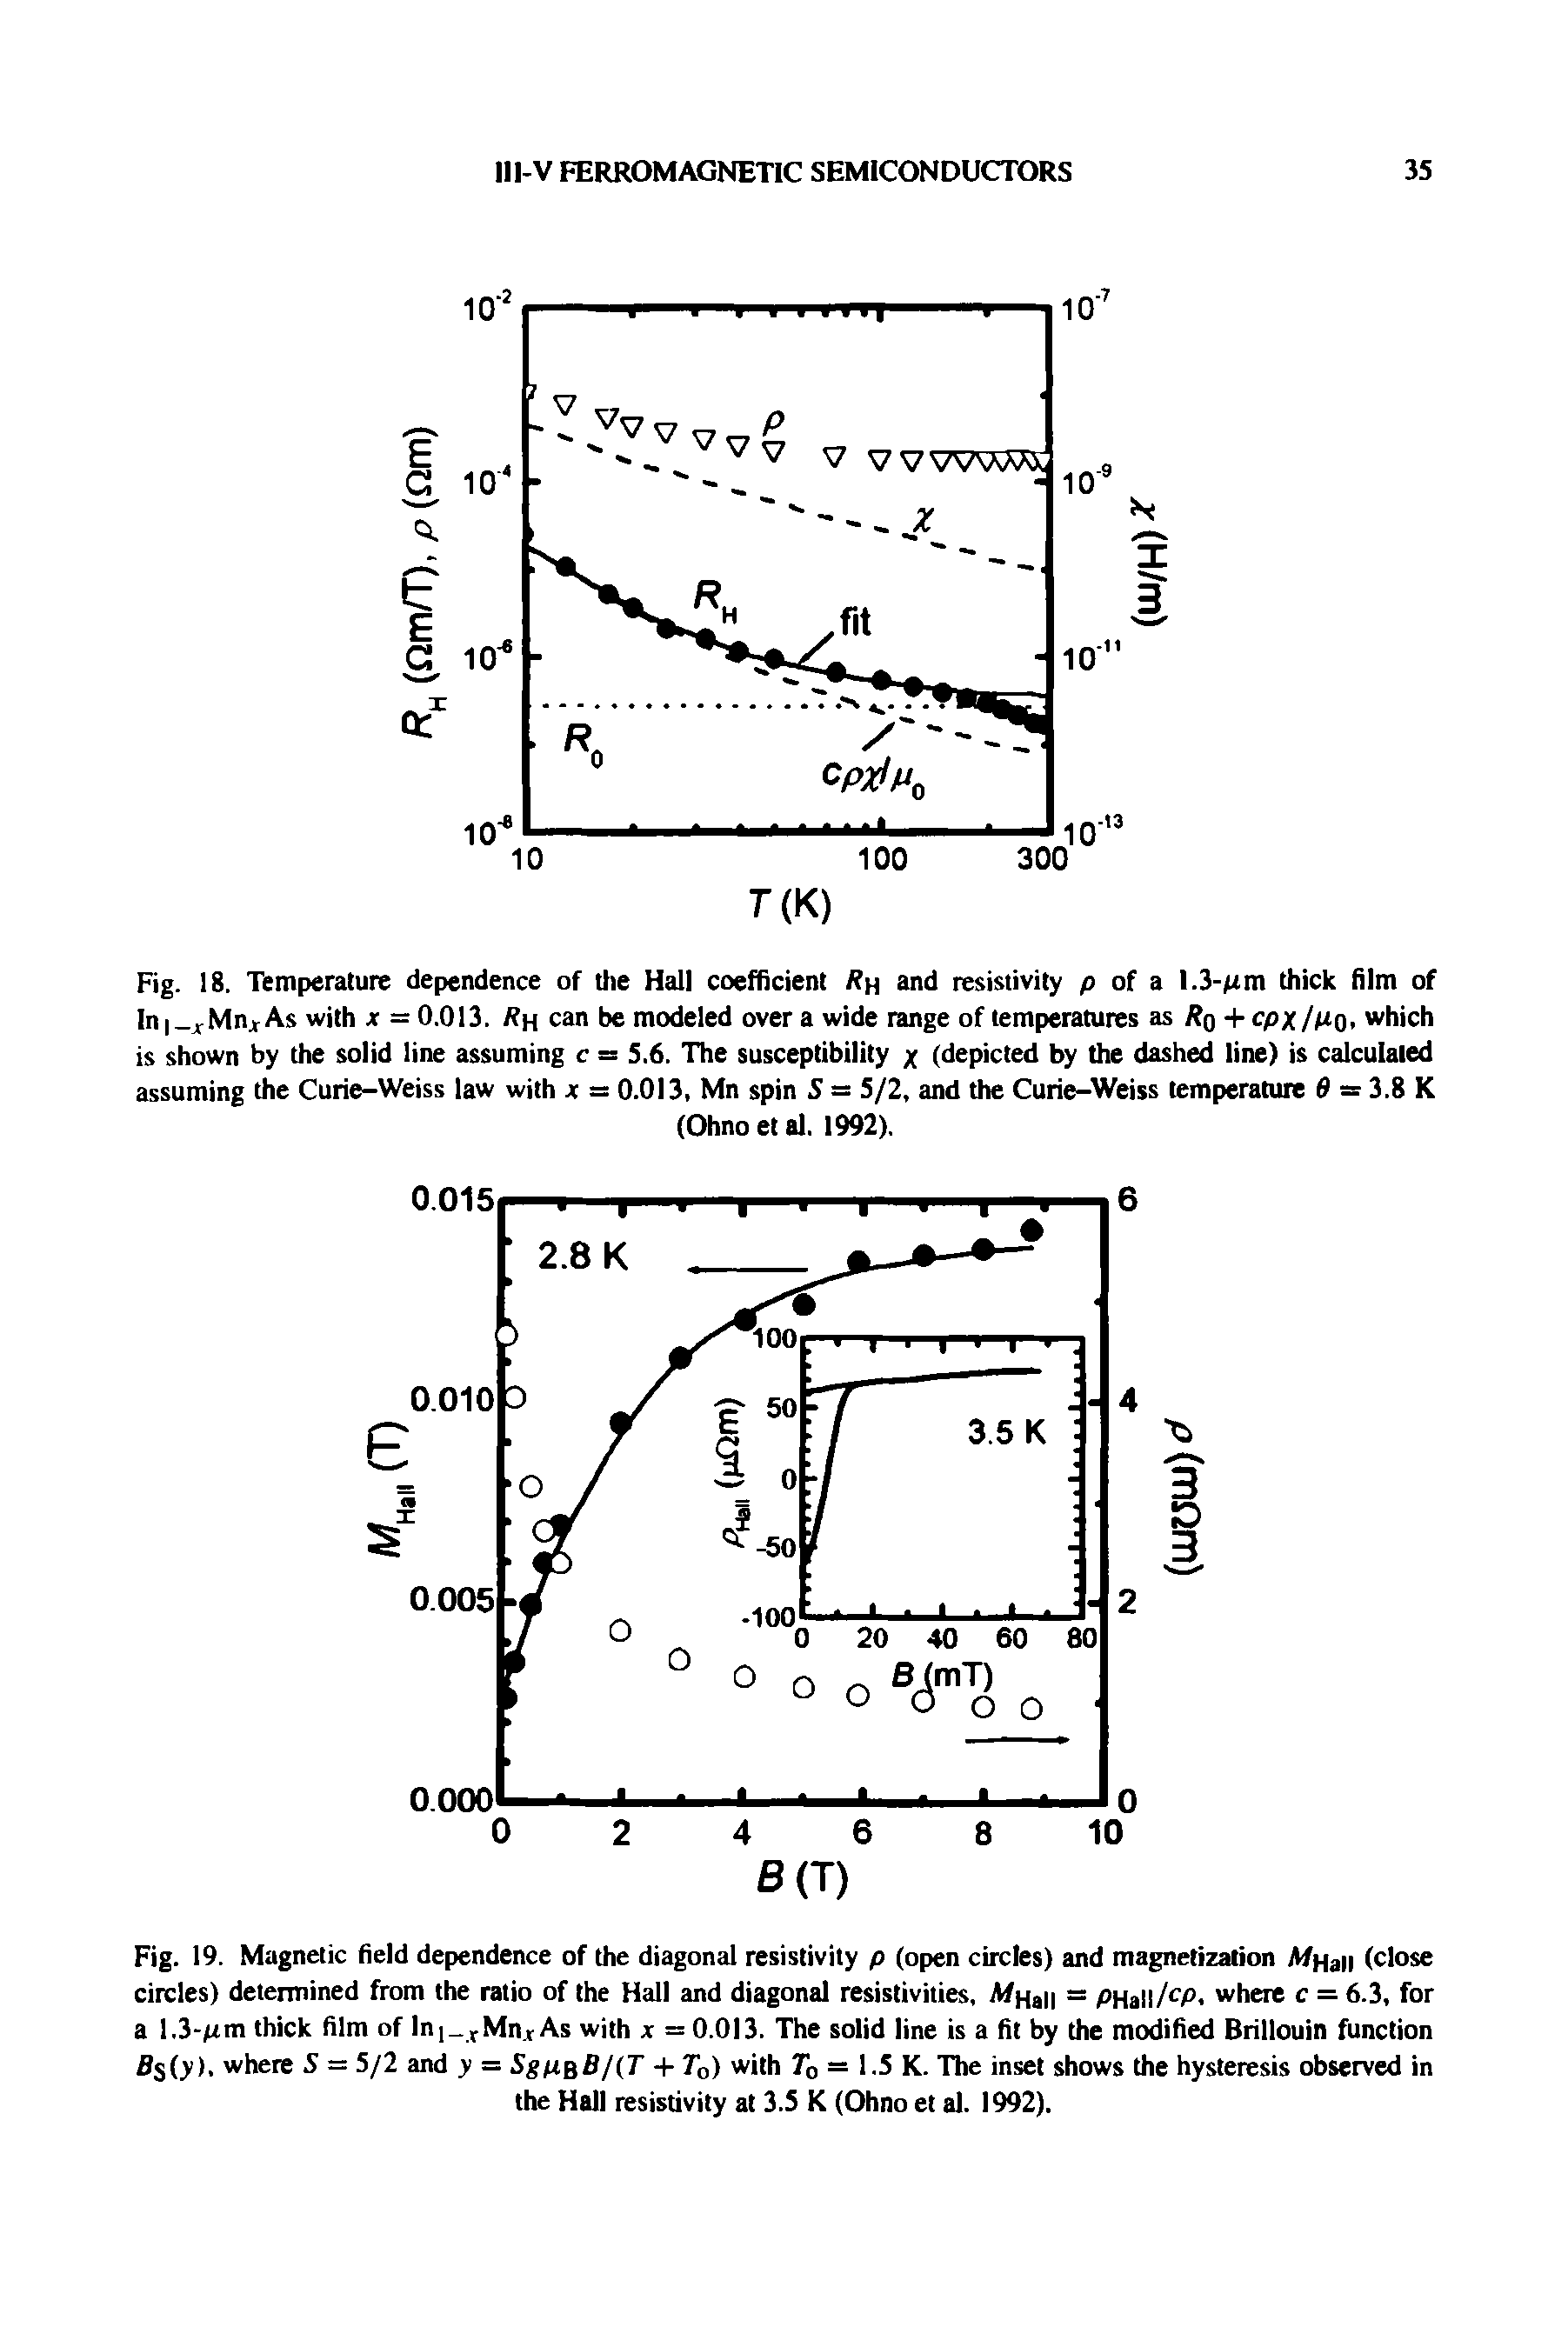 Fig. 18. Temperature dependence of the Hall coefficient h and resistivity p of a 1.3-ftm thick film of In, Mn As with x = 0.013. Rh can be modeled over a wide range of temperatures as Rq + cpx/Po, which is shown by the solid line assuming c = 5.6. The susceptibility x (depicted by the dashed line) is calculated assuming the Curie-Weiss law with x = 0.013, Mn spin S = 5/2, and the Curie-Weiss temperature 6 = 3.8 K...